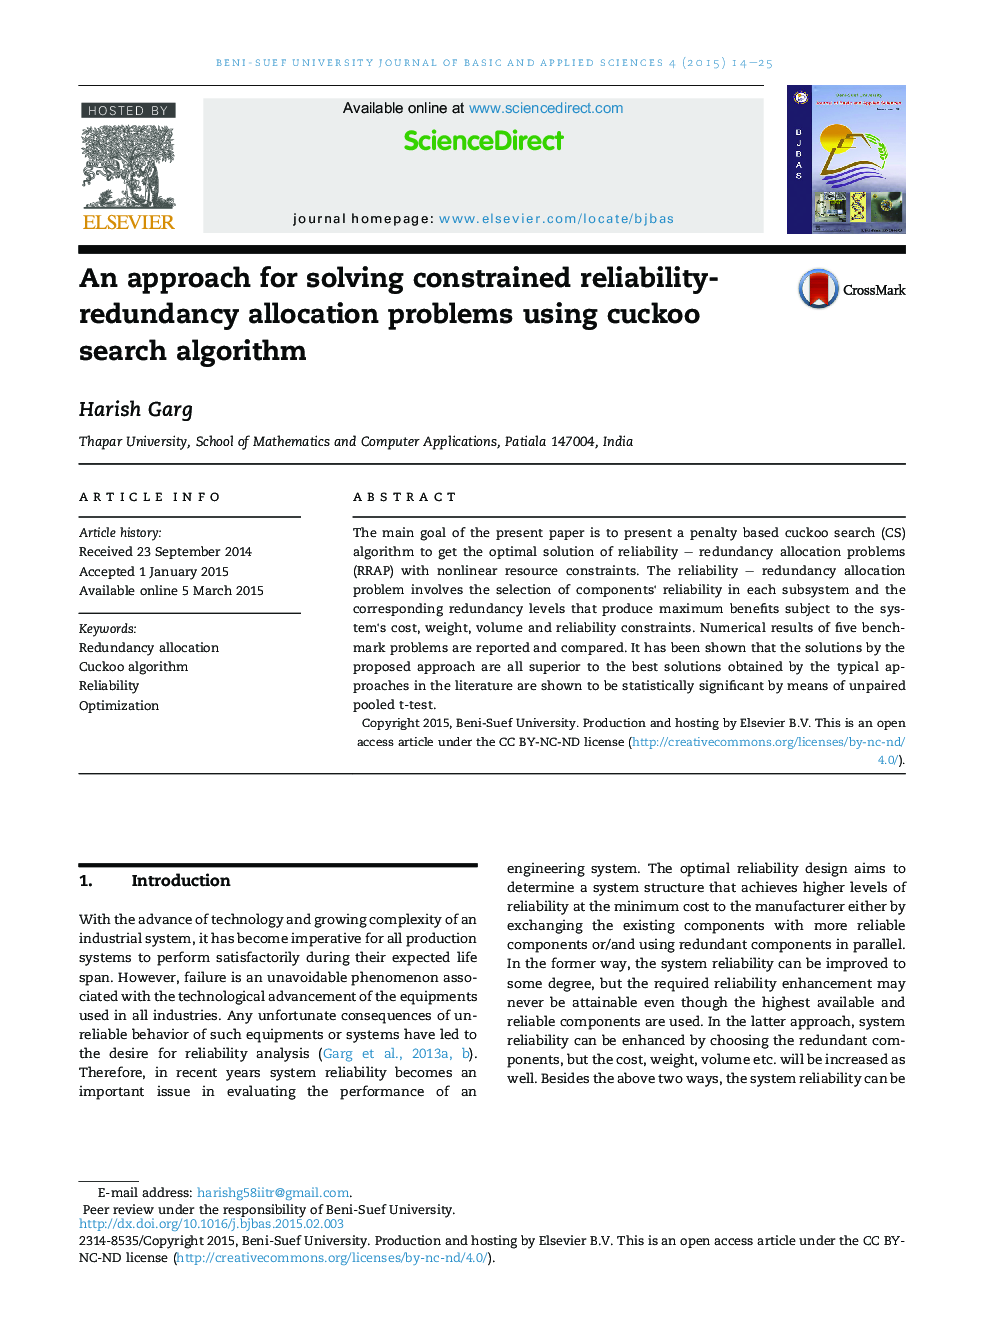 An approach for solving constrained reliability-redundancy allocation problems using cuckoo search algorithm 